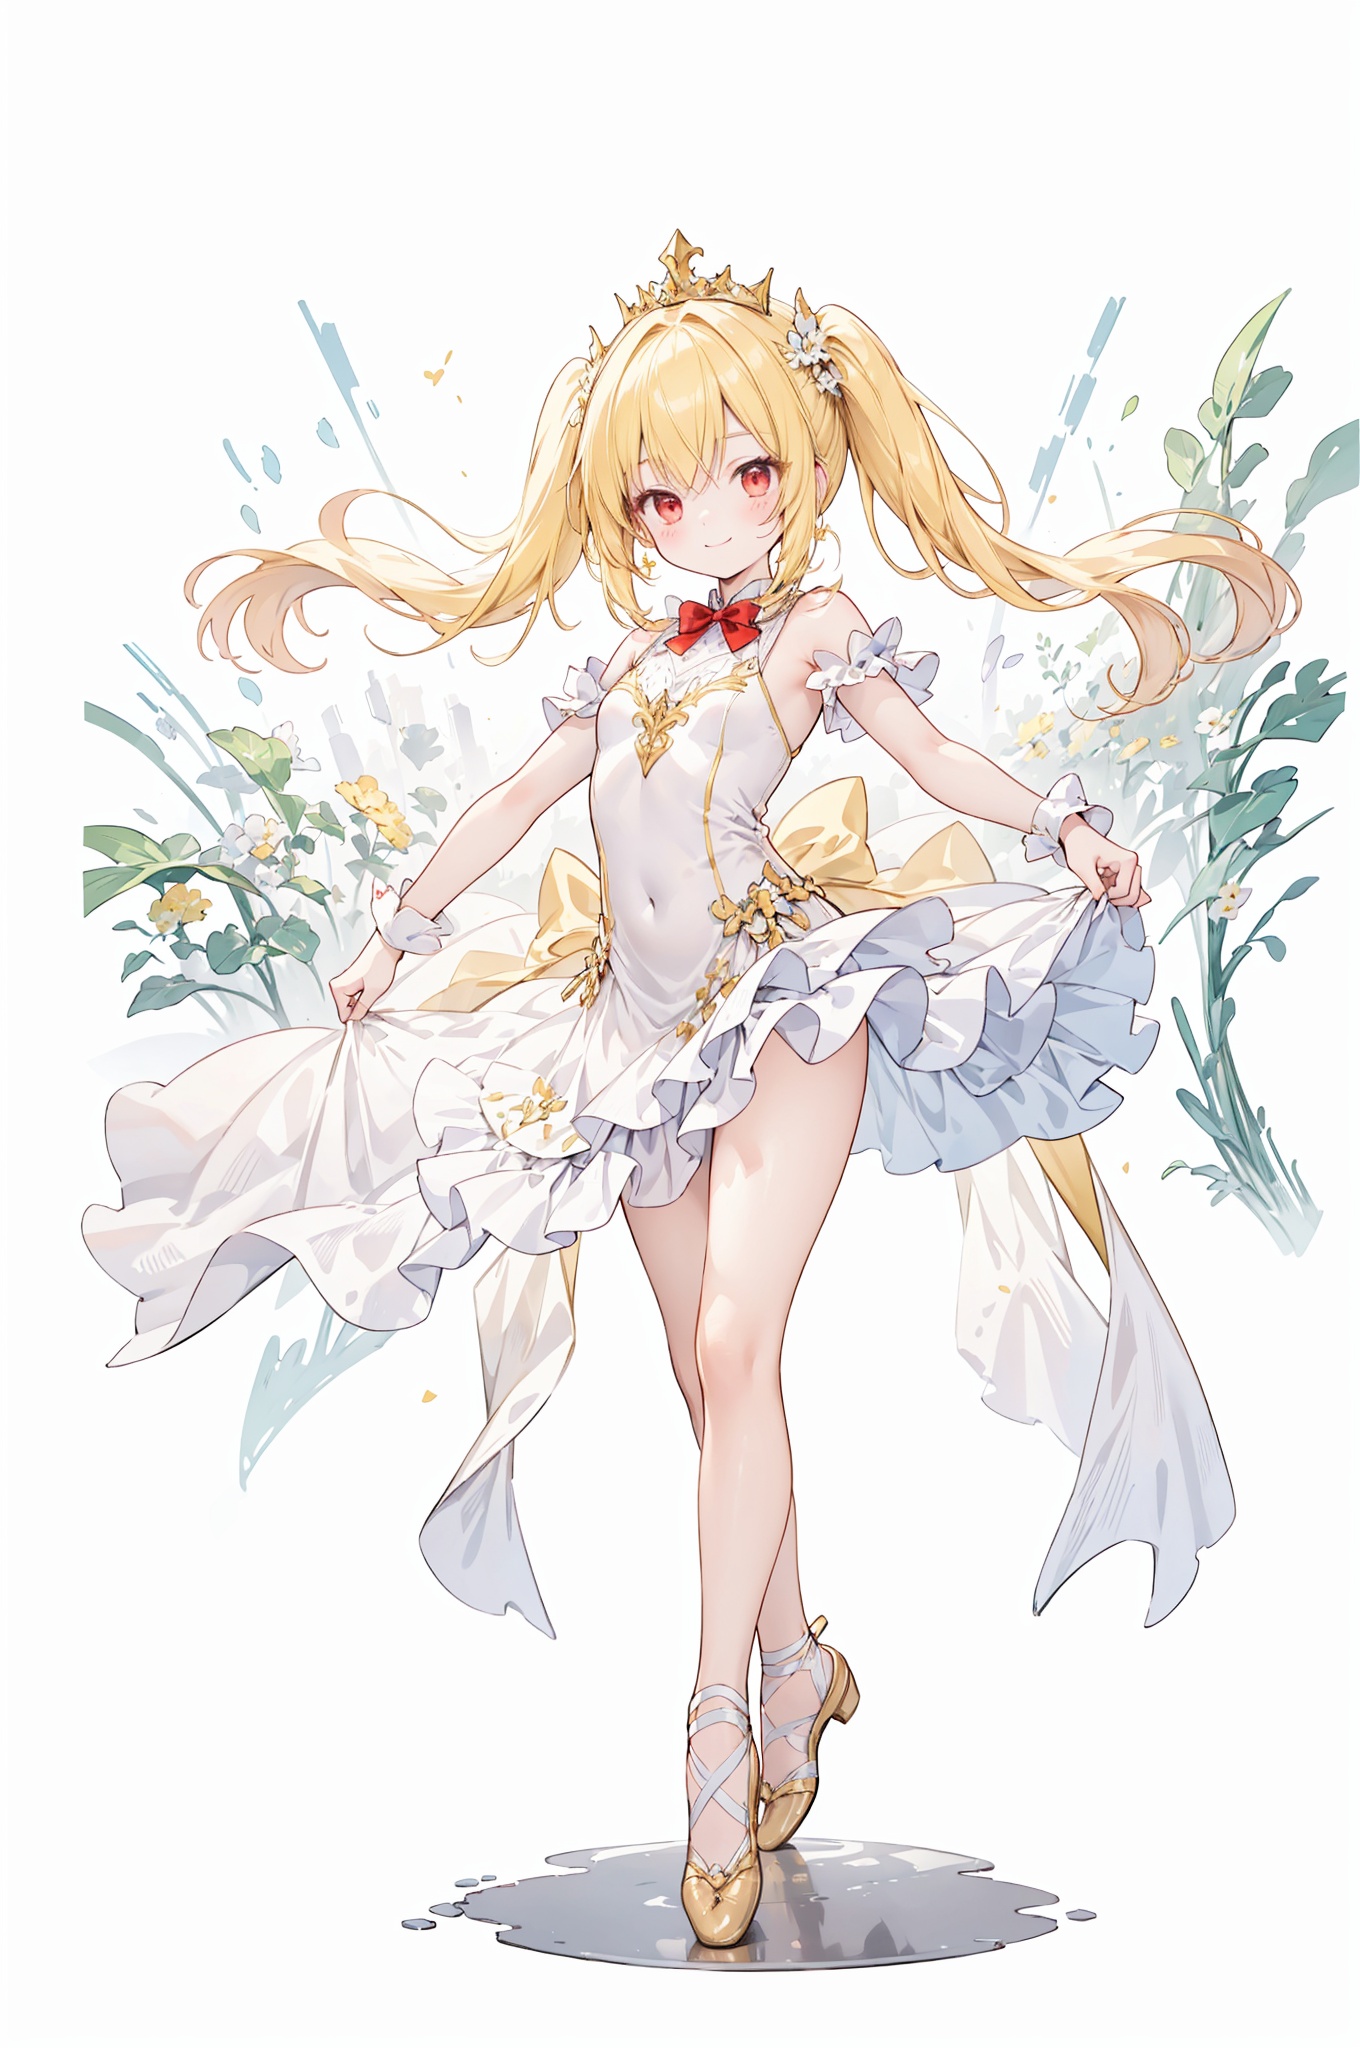 (best quality), ((masterpiece)), (highres),standing,original, extremely detailed wallpaper, (an extremely delicate and beautiful),(petite:1.2),yellow hair,red eyes,twin_tails,hair flower,fipped hair,floating hair,red bowtie, white dance dress,simple drawing,detailed background,elegant,smiling,dancing pose,dancing,ballet,tiara the result is a culturally rich portrayal that celebrates beauty, grace, and the uplifting emotions brought forth by the art of ballet,leg up:0.5, yellow tone color,full body,